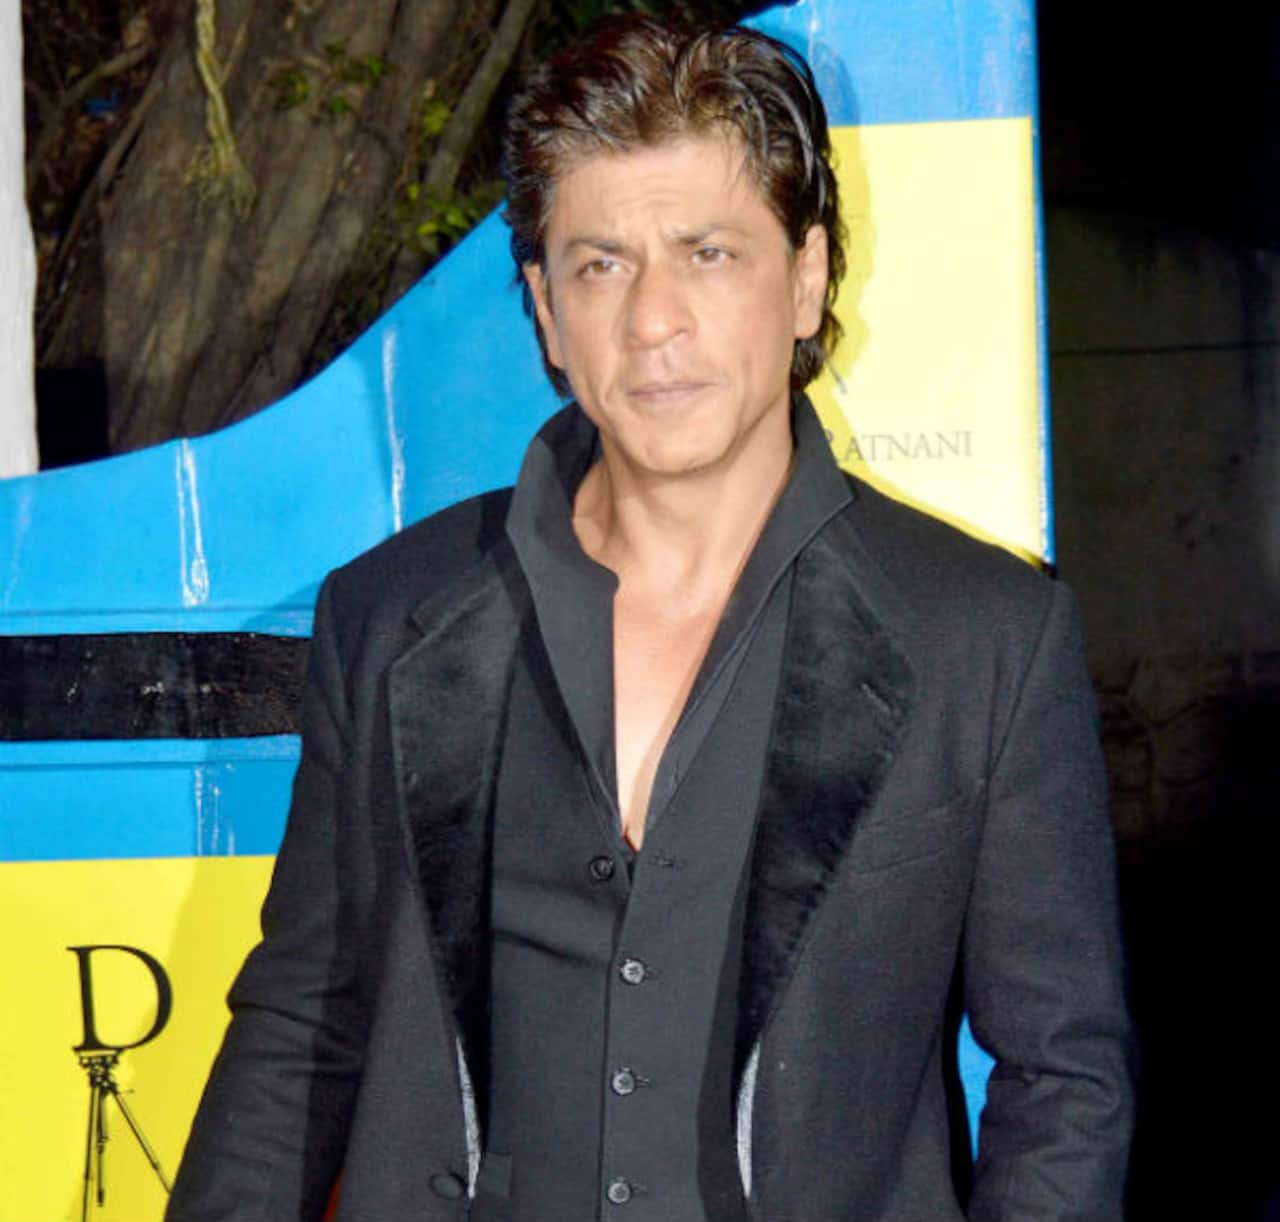 Definitive proof that Shah Rukh Khan is the king of Box office!